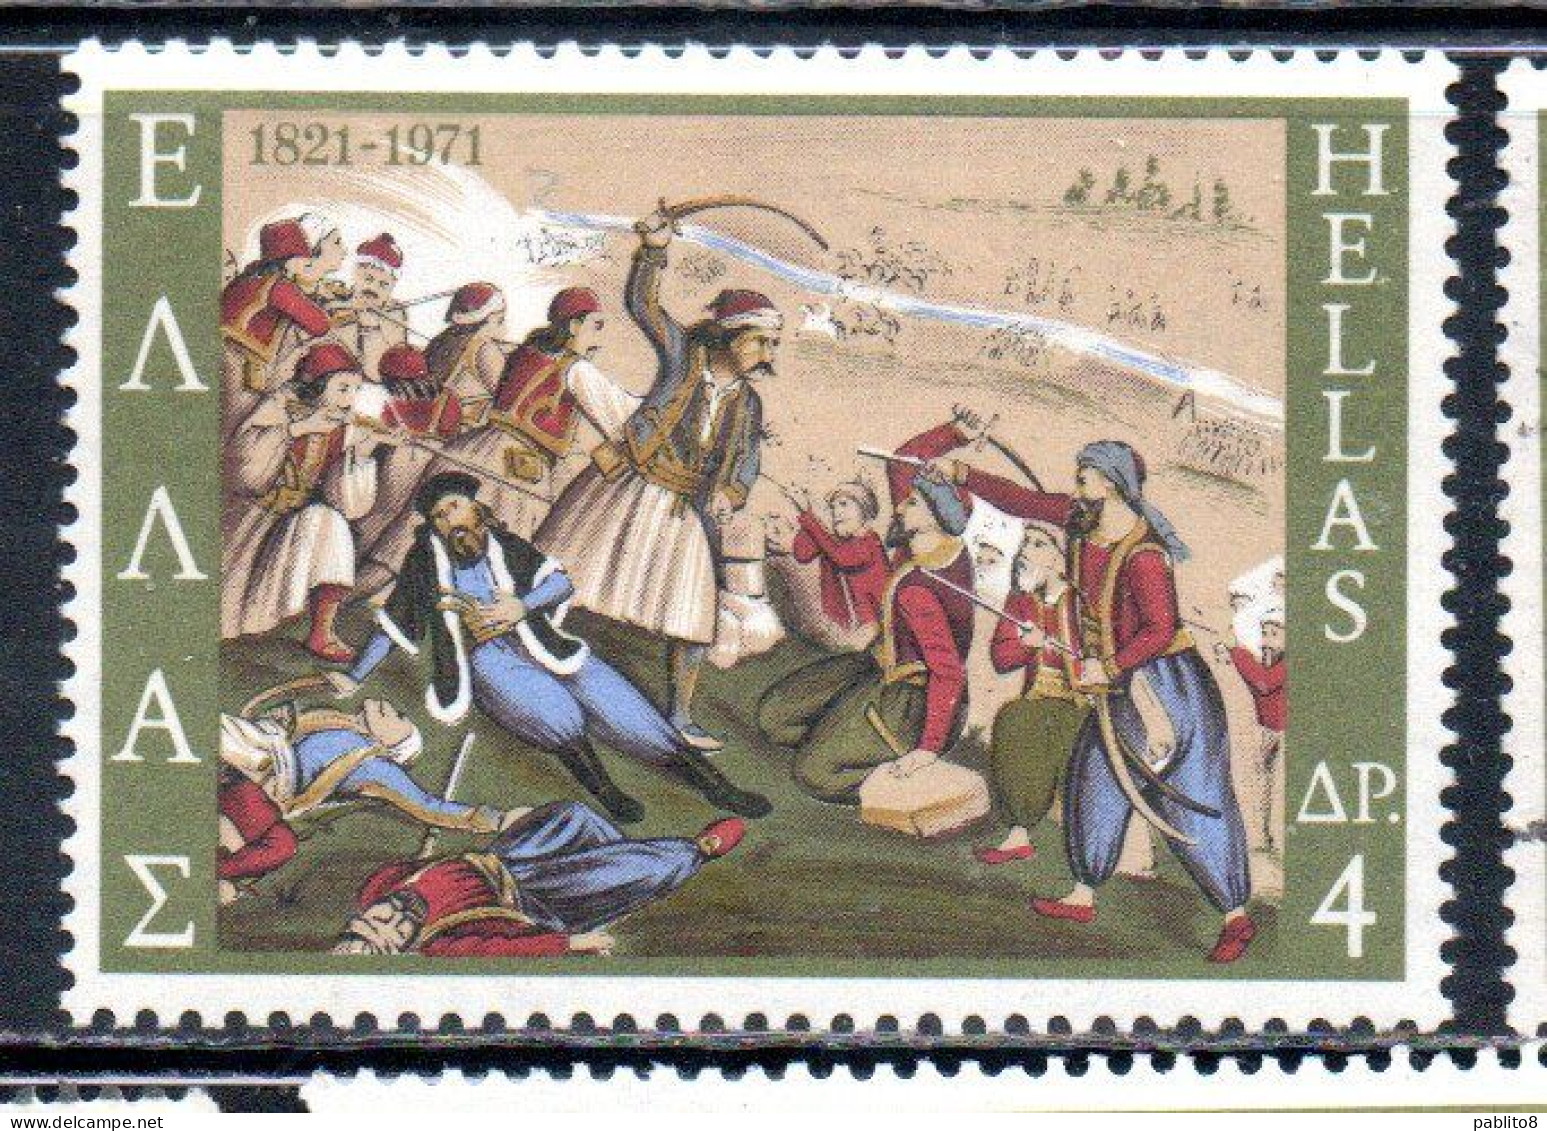 GREECE GRECIA HELLAS 1971 UPRISING AGAINST TURKS DEATH OF BISHOP ISAIAS BATTLE OF ALAMANA 4d MNH - Unused Stamps